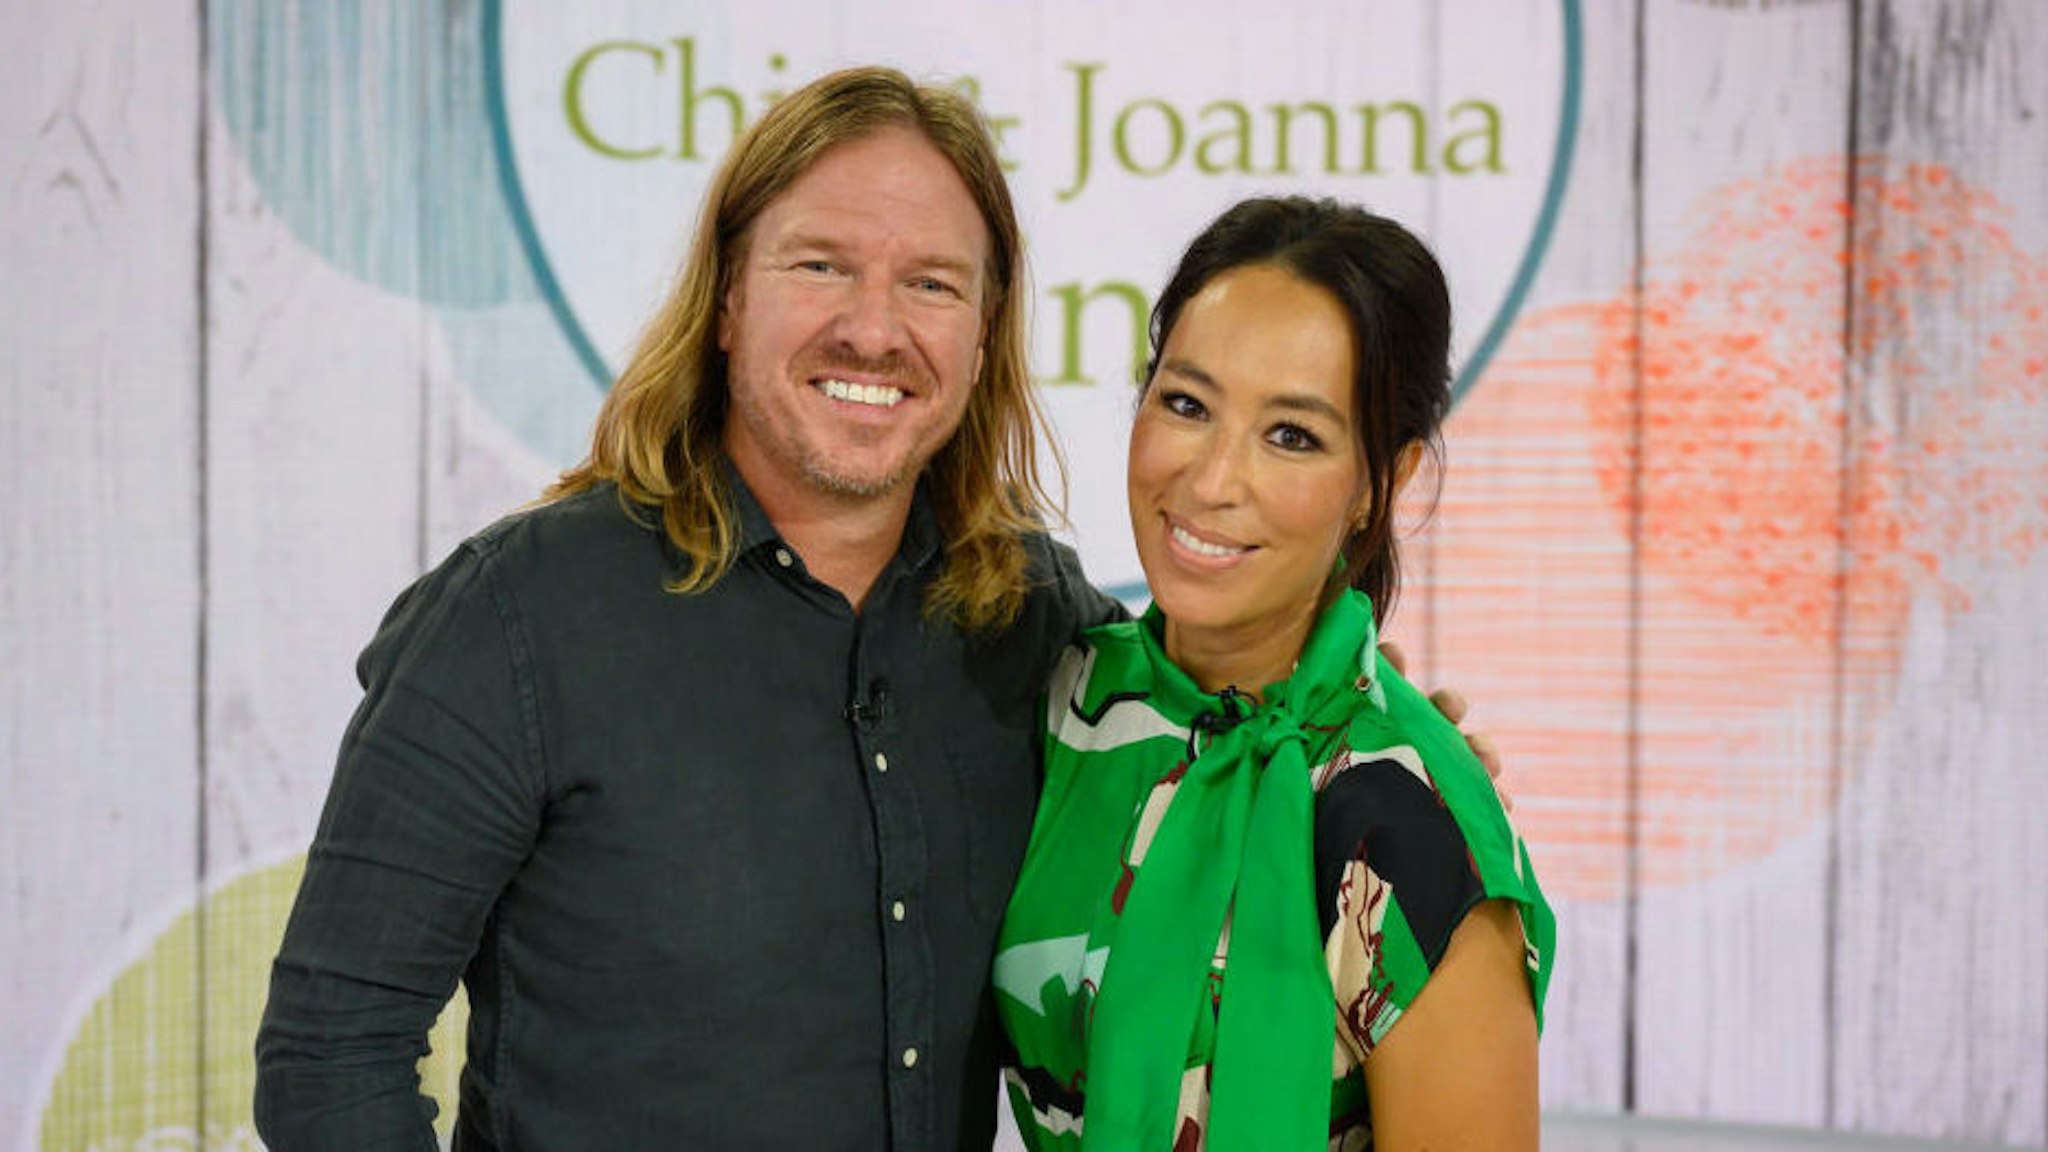 Chip and Joanna Gaines in Studio 1A on Thursday July 15, 2021